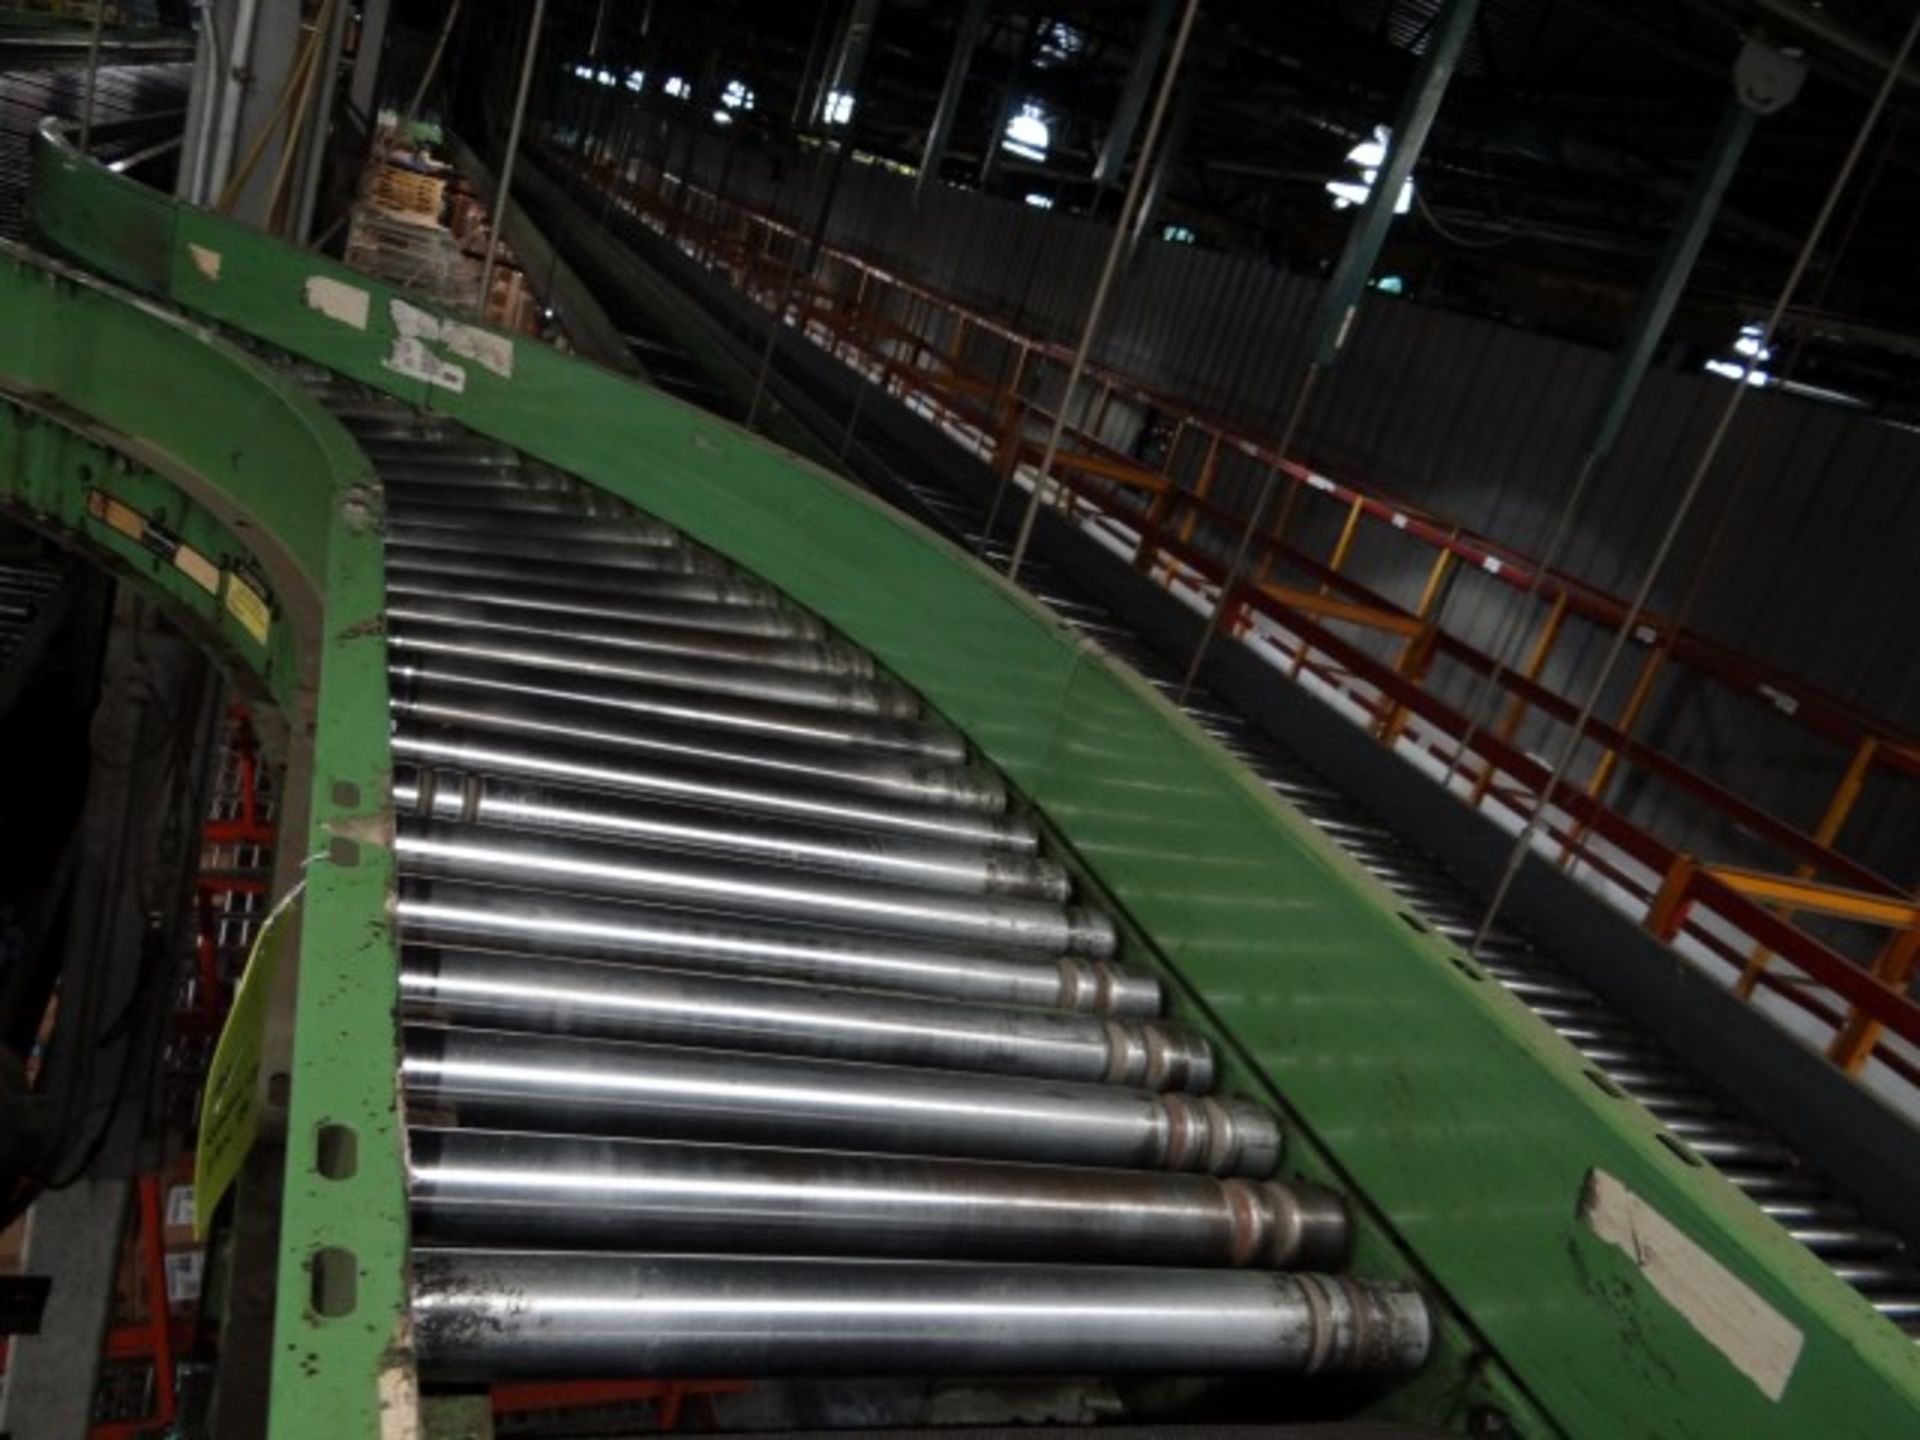 Approximately 300' of Roller Conveyor